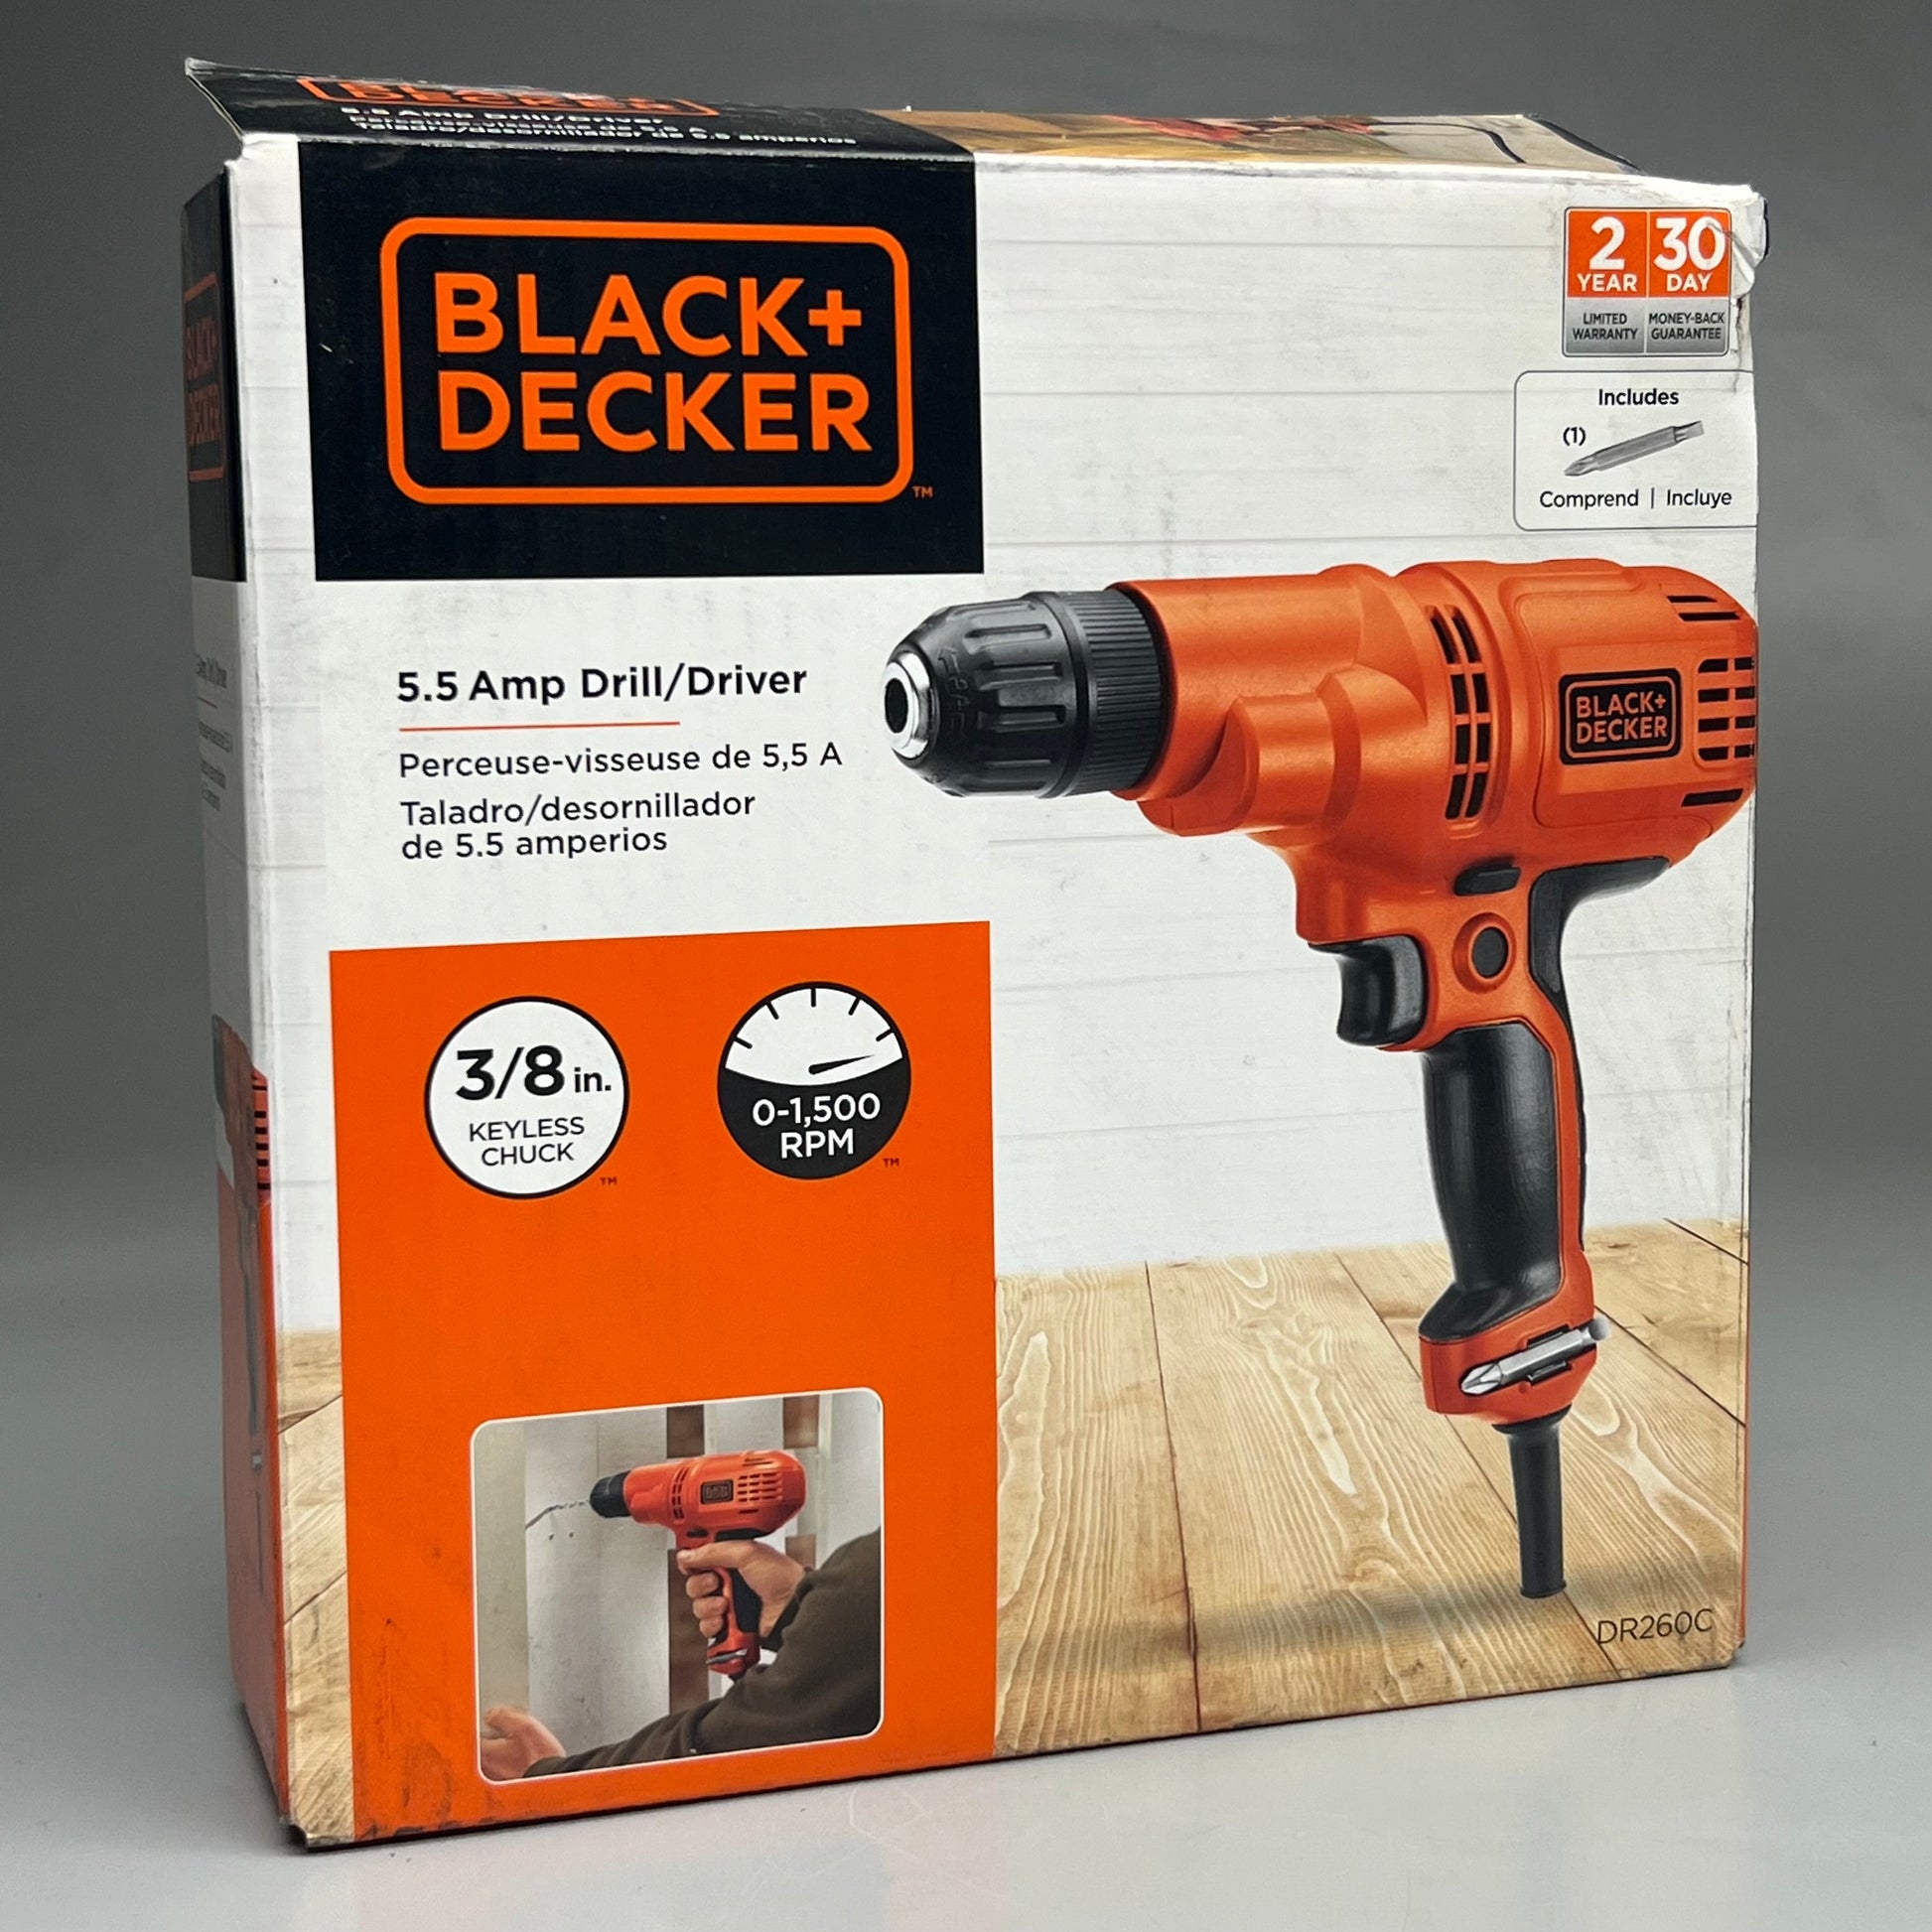 BLACK & DECKER 5.5 Amp Drill / Driver Variable Speed Controlled 3